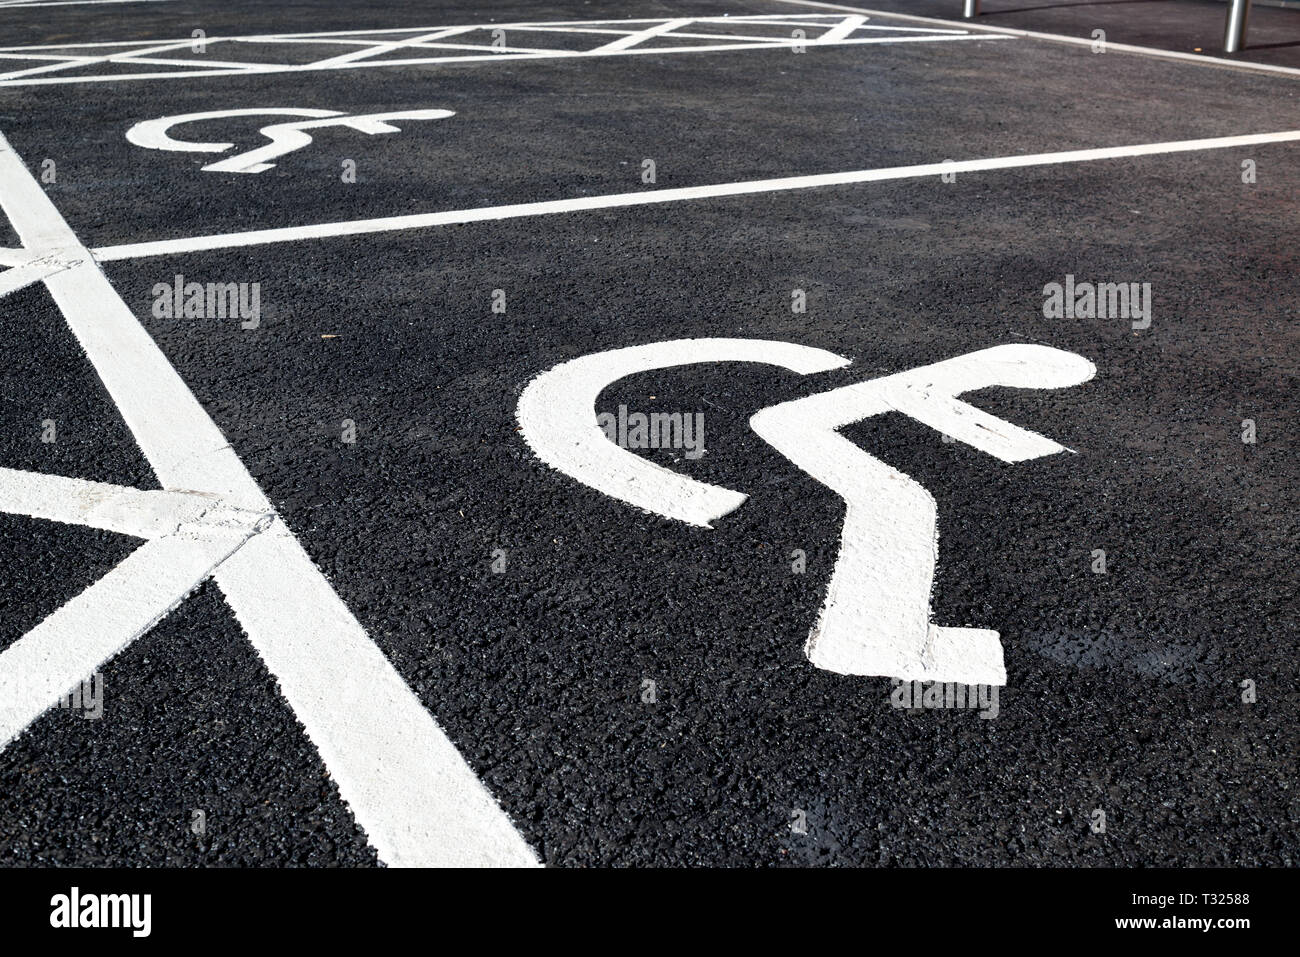 Disability wheelchair markings painted on Tarmac surface. Stock Photo